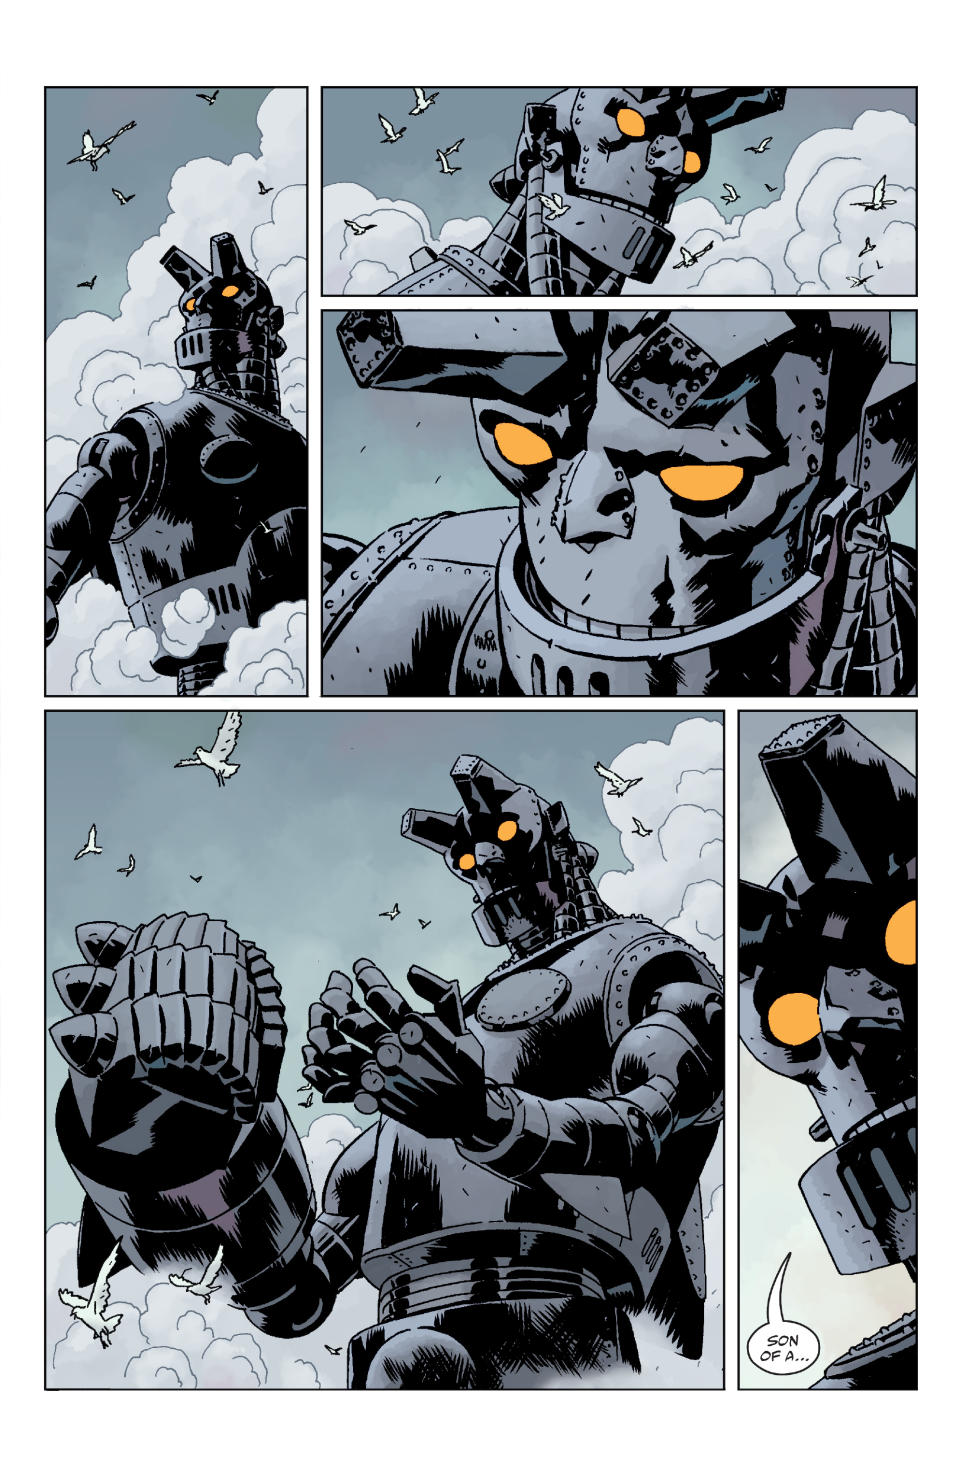 Pages from Giant Robot Hellboy #1